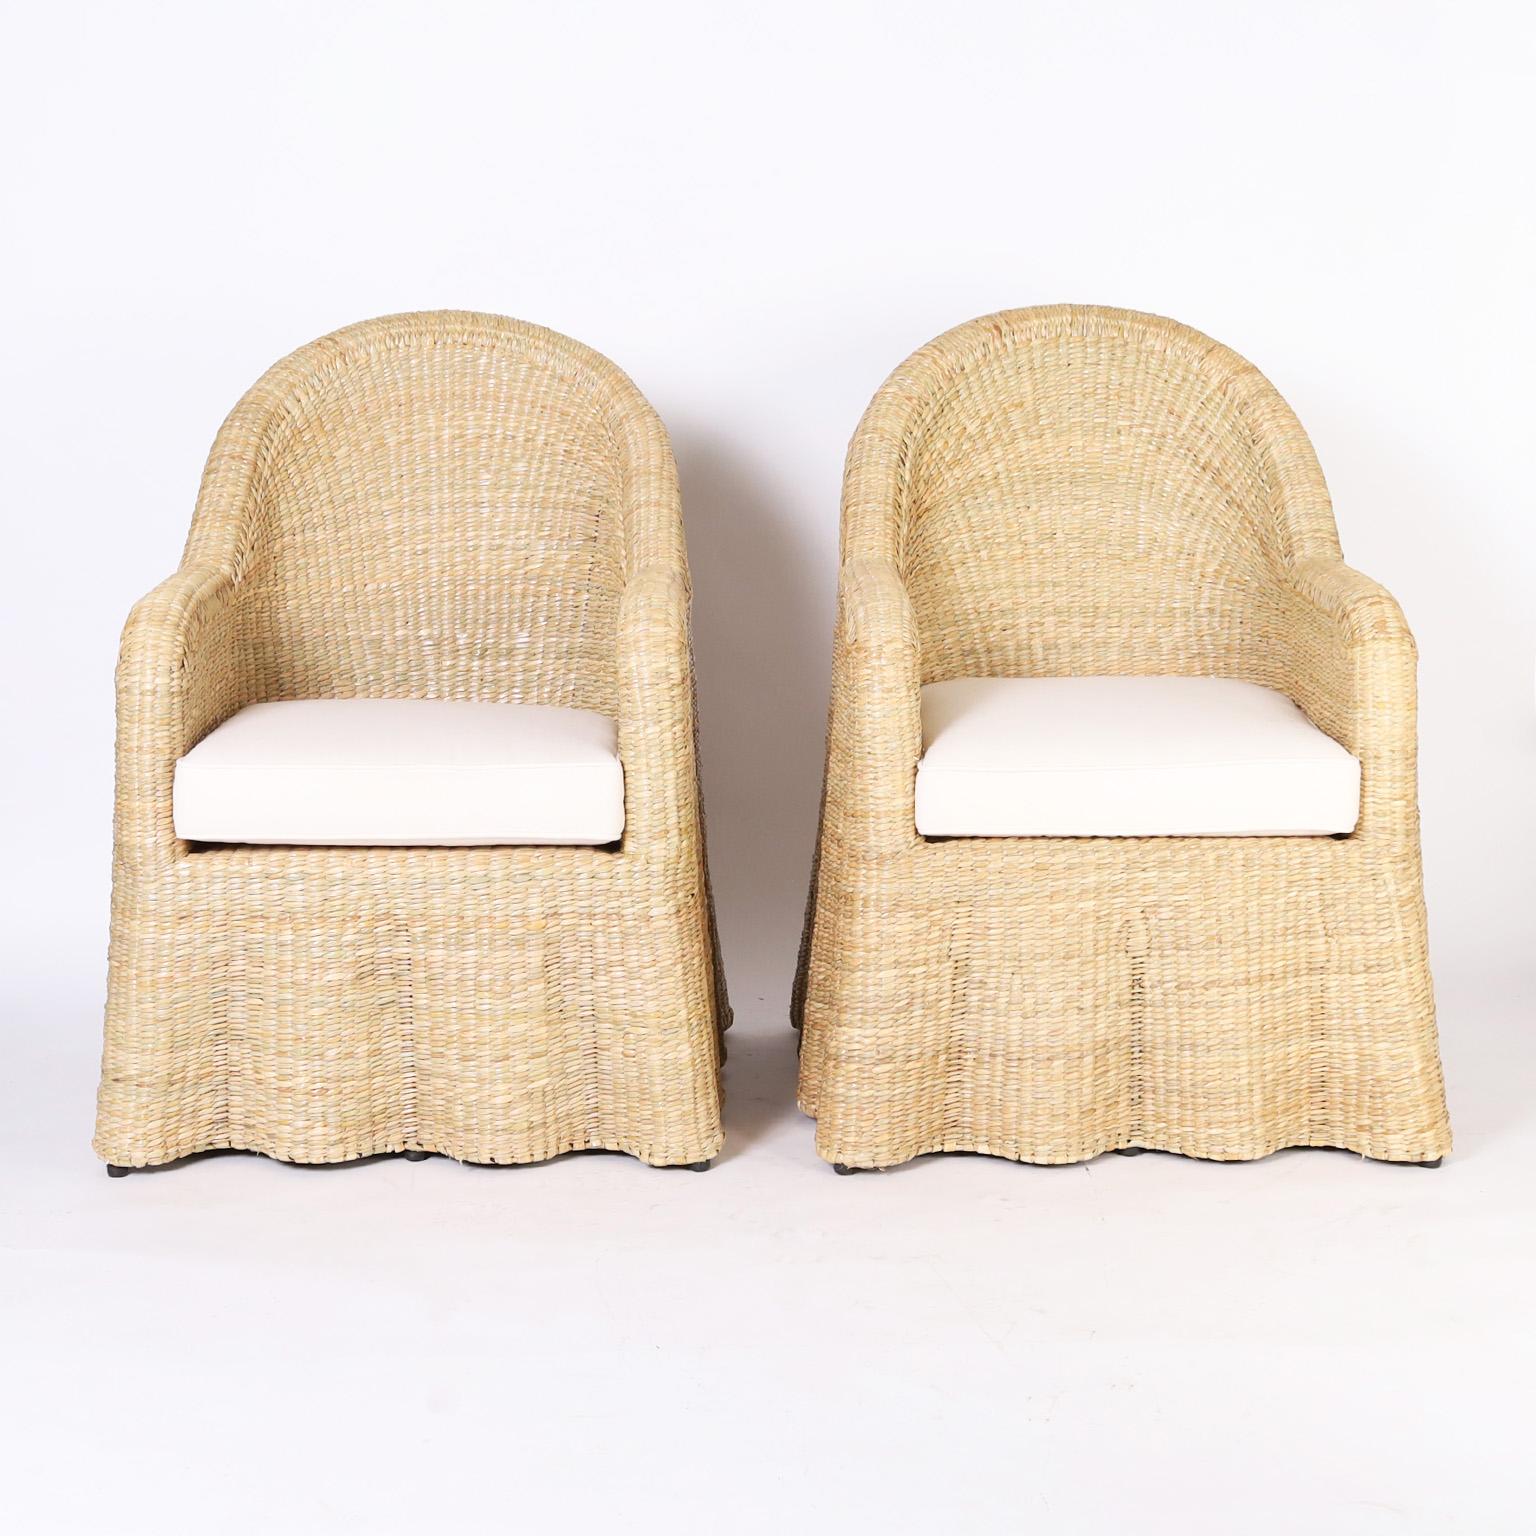 Chic midcentury inspired pair of ghost drapery armchairs handcrafted with a durable metal frame wrapped in reed with a tight elegant form, from the 2023 FS Flores Collection designed and manufactured exclusively by F.S. Henemader Antiques.